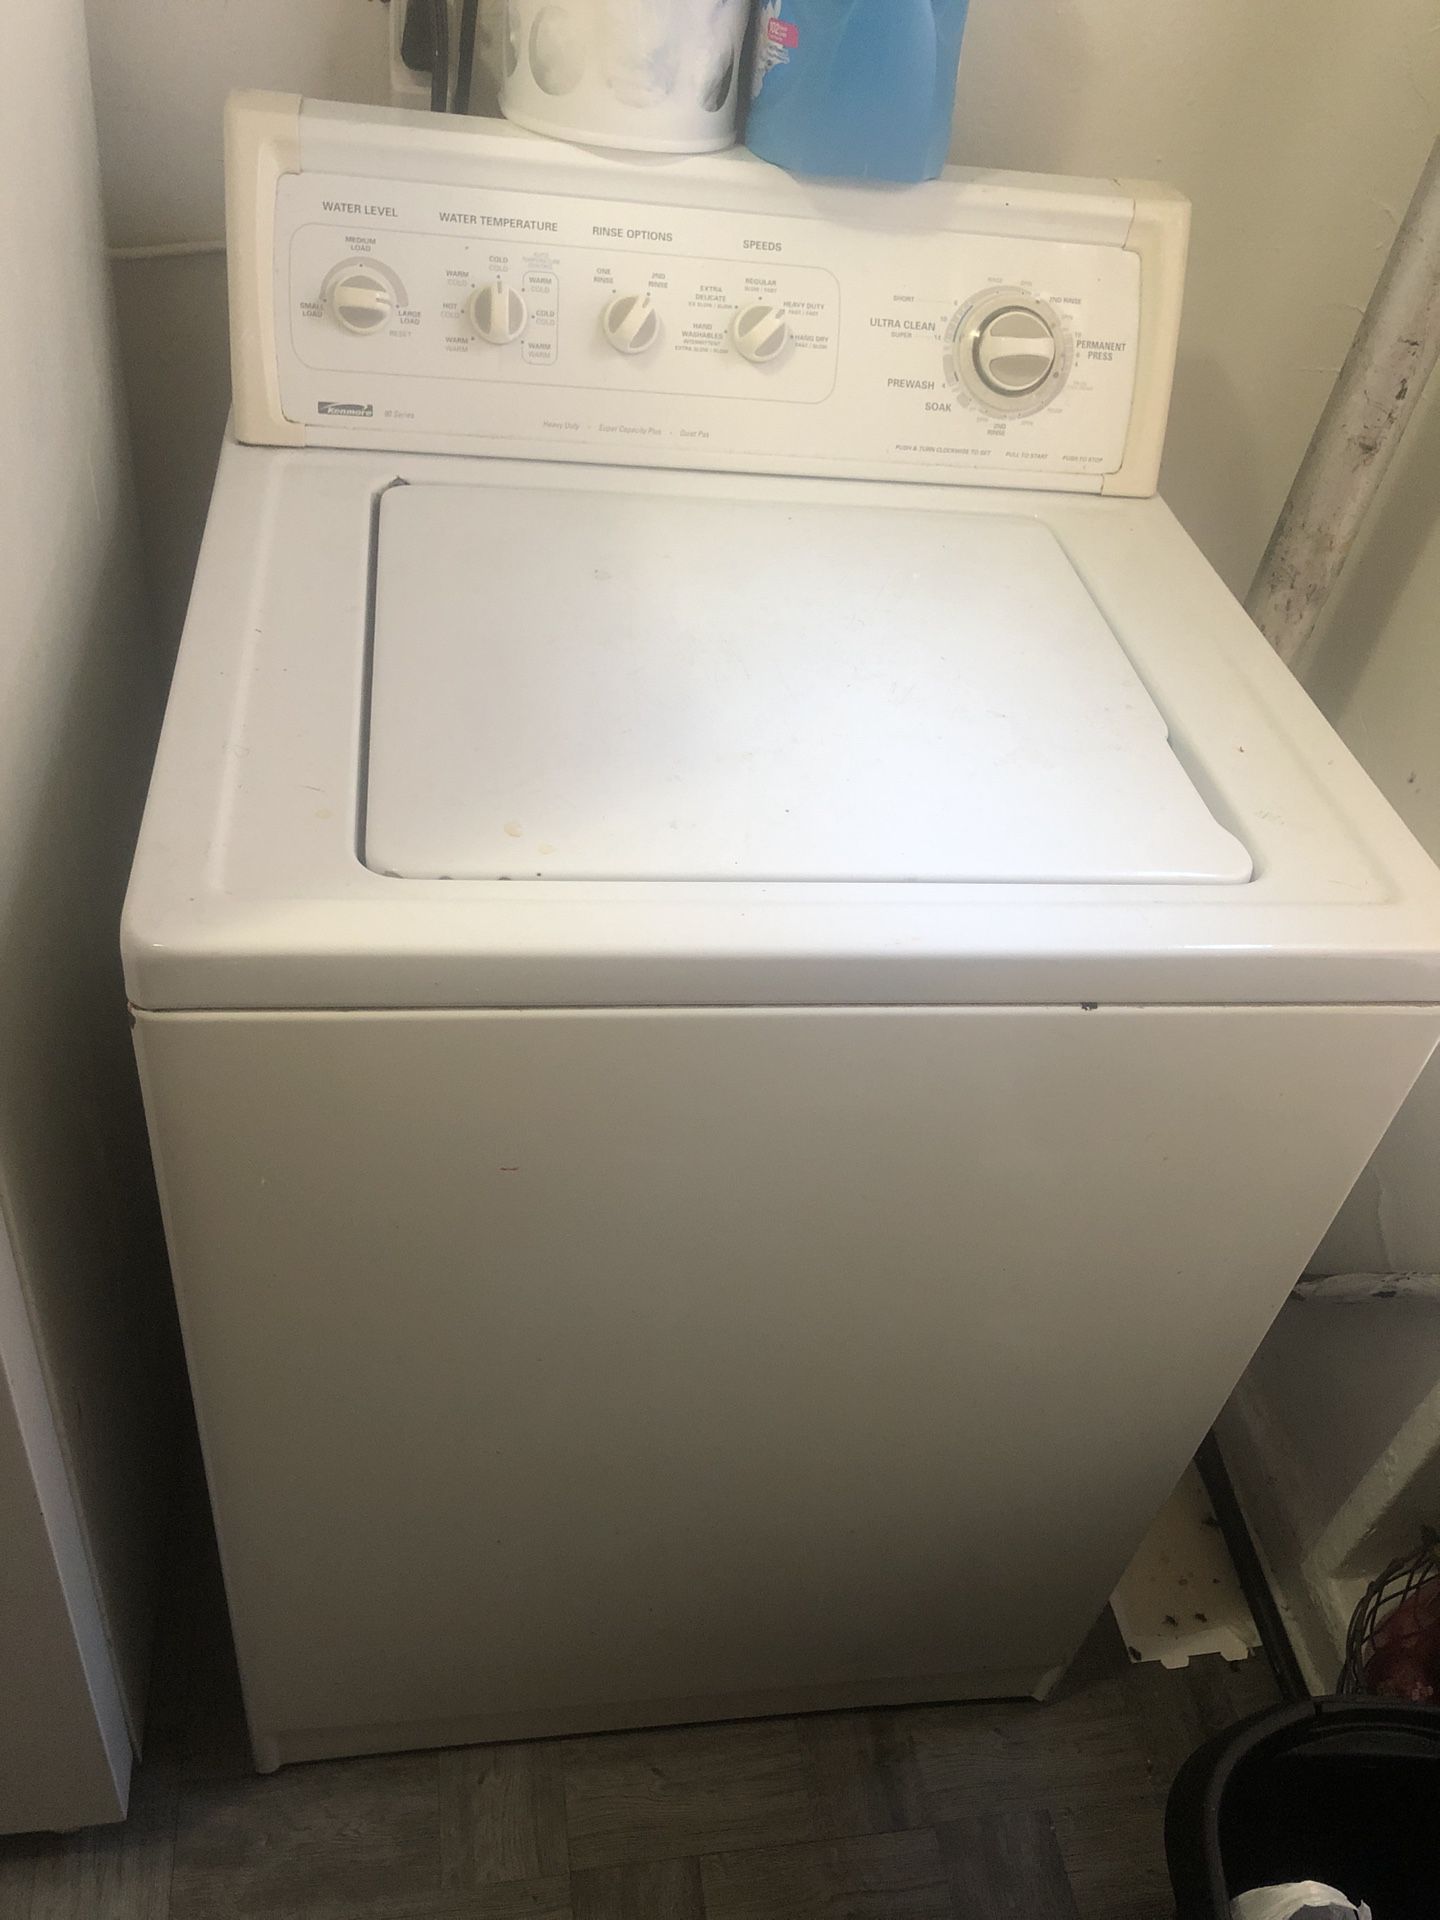 Washer kenmore